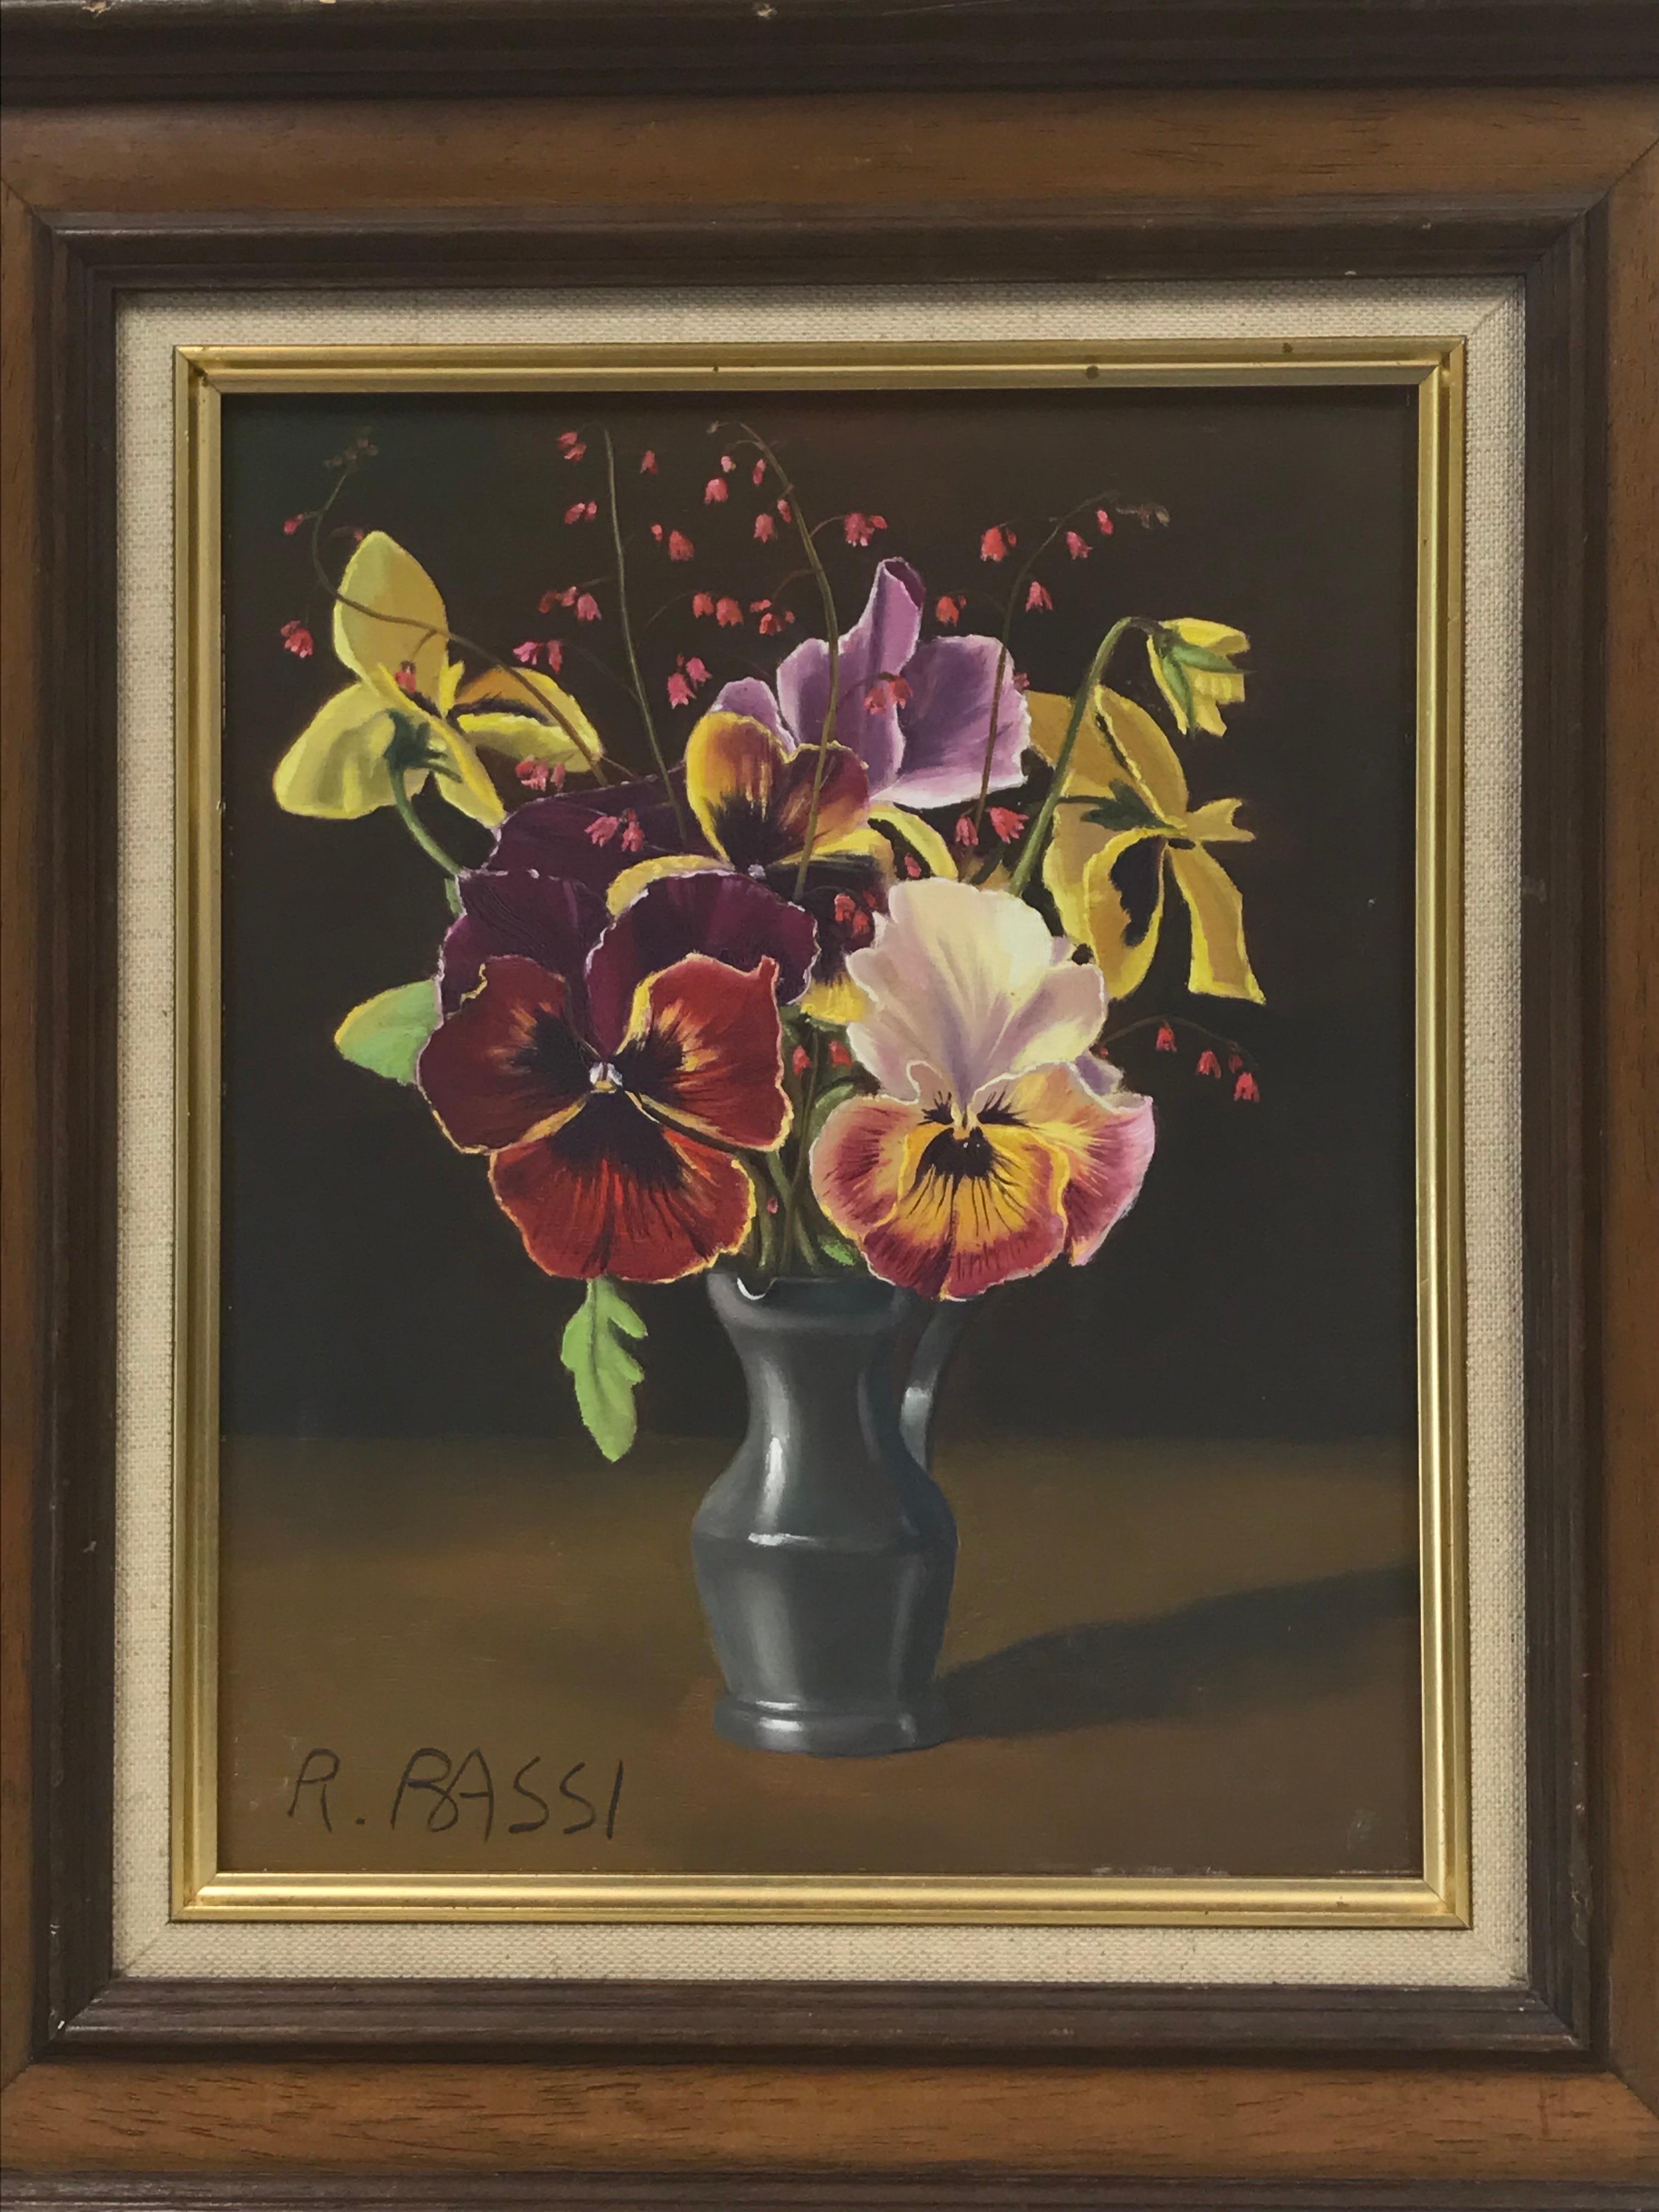 Artist/ School: Italian School, signed lower left, 20th century

Title: Flowers in a Pewter Vase

Medium: oil painting on board , framed 

Size:
framed: 15.5 x 13.5 inches
painting: 10.75 x 8.75 inches

Provenance: private collection,